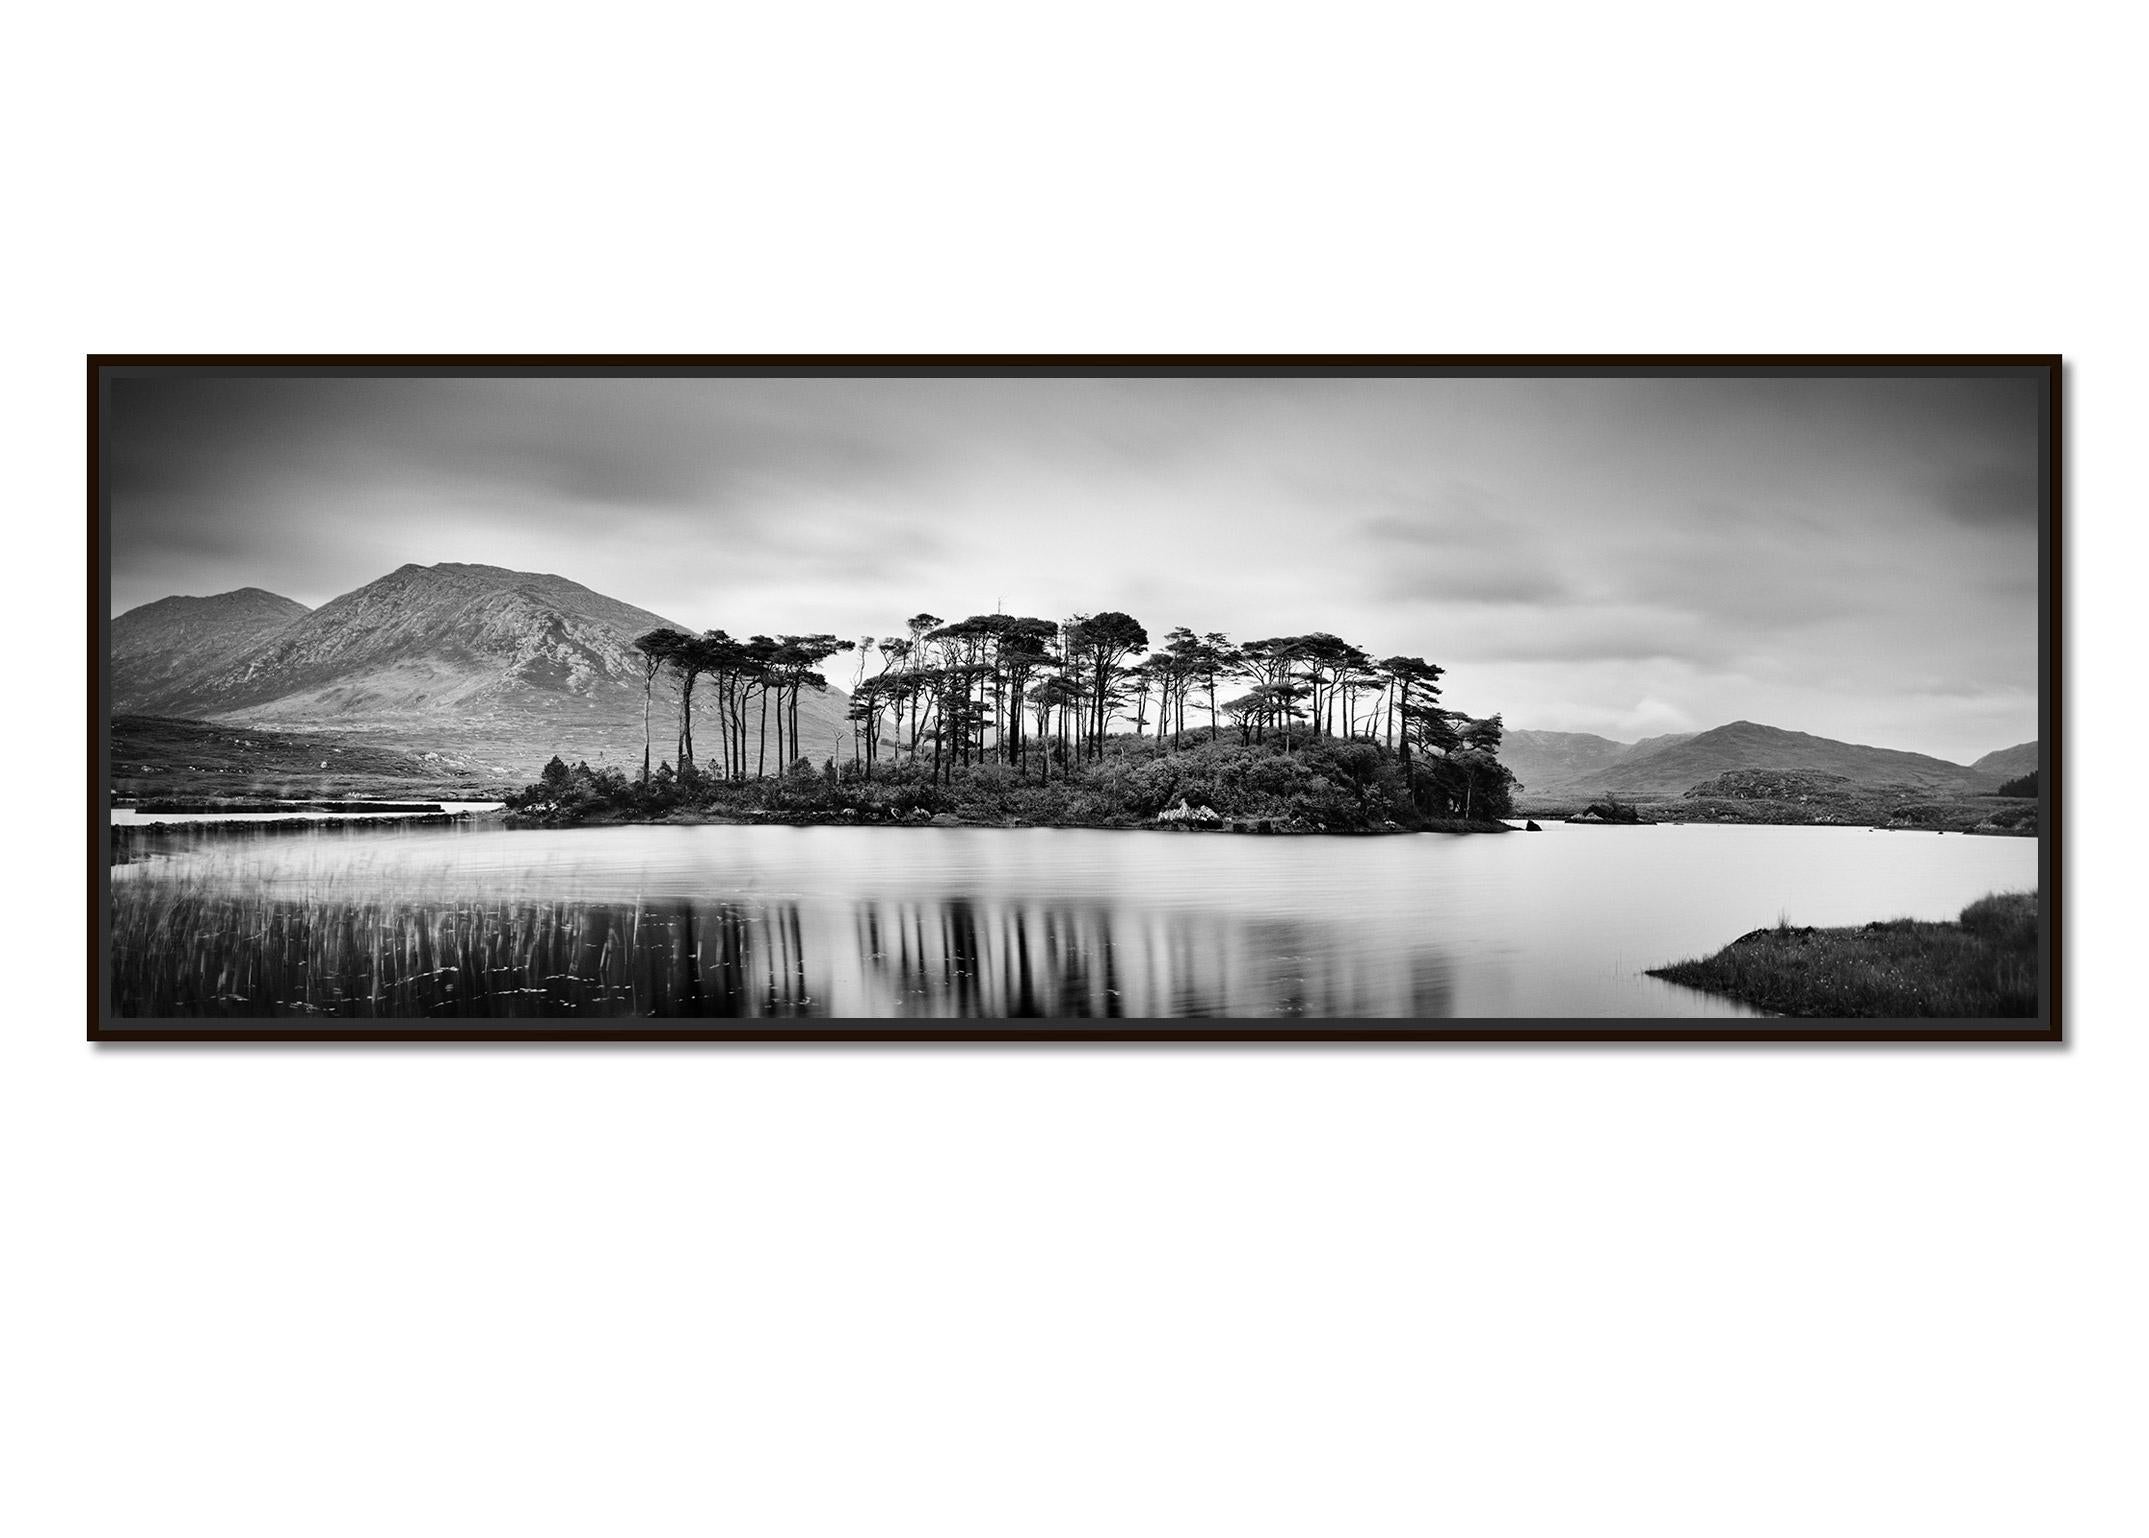 Tree Island Panorama, contemporary black and white art waterscape photo print - Photograph by Gerald Berghammer